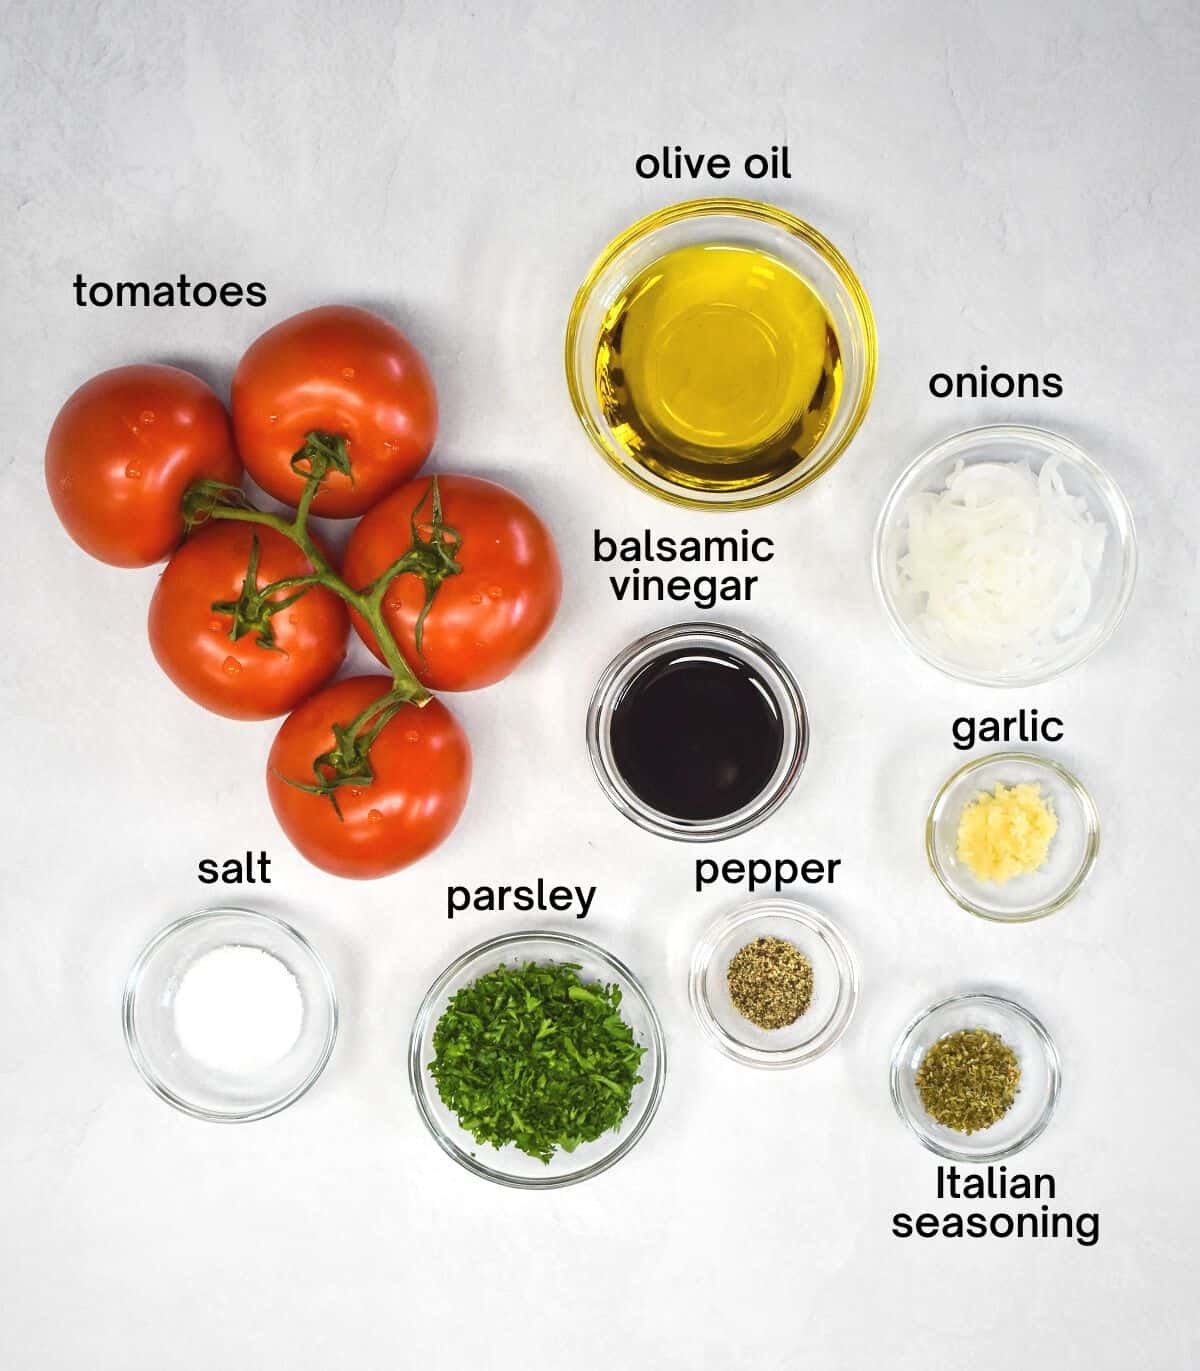 The ingredients for the dish arranged on a white table and labeled in small black letters.